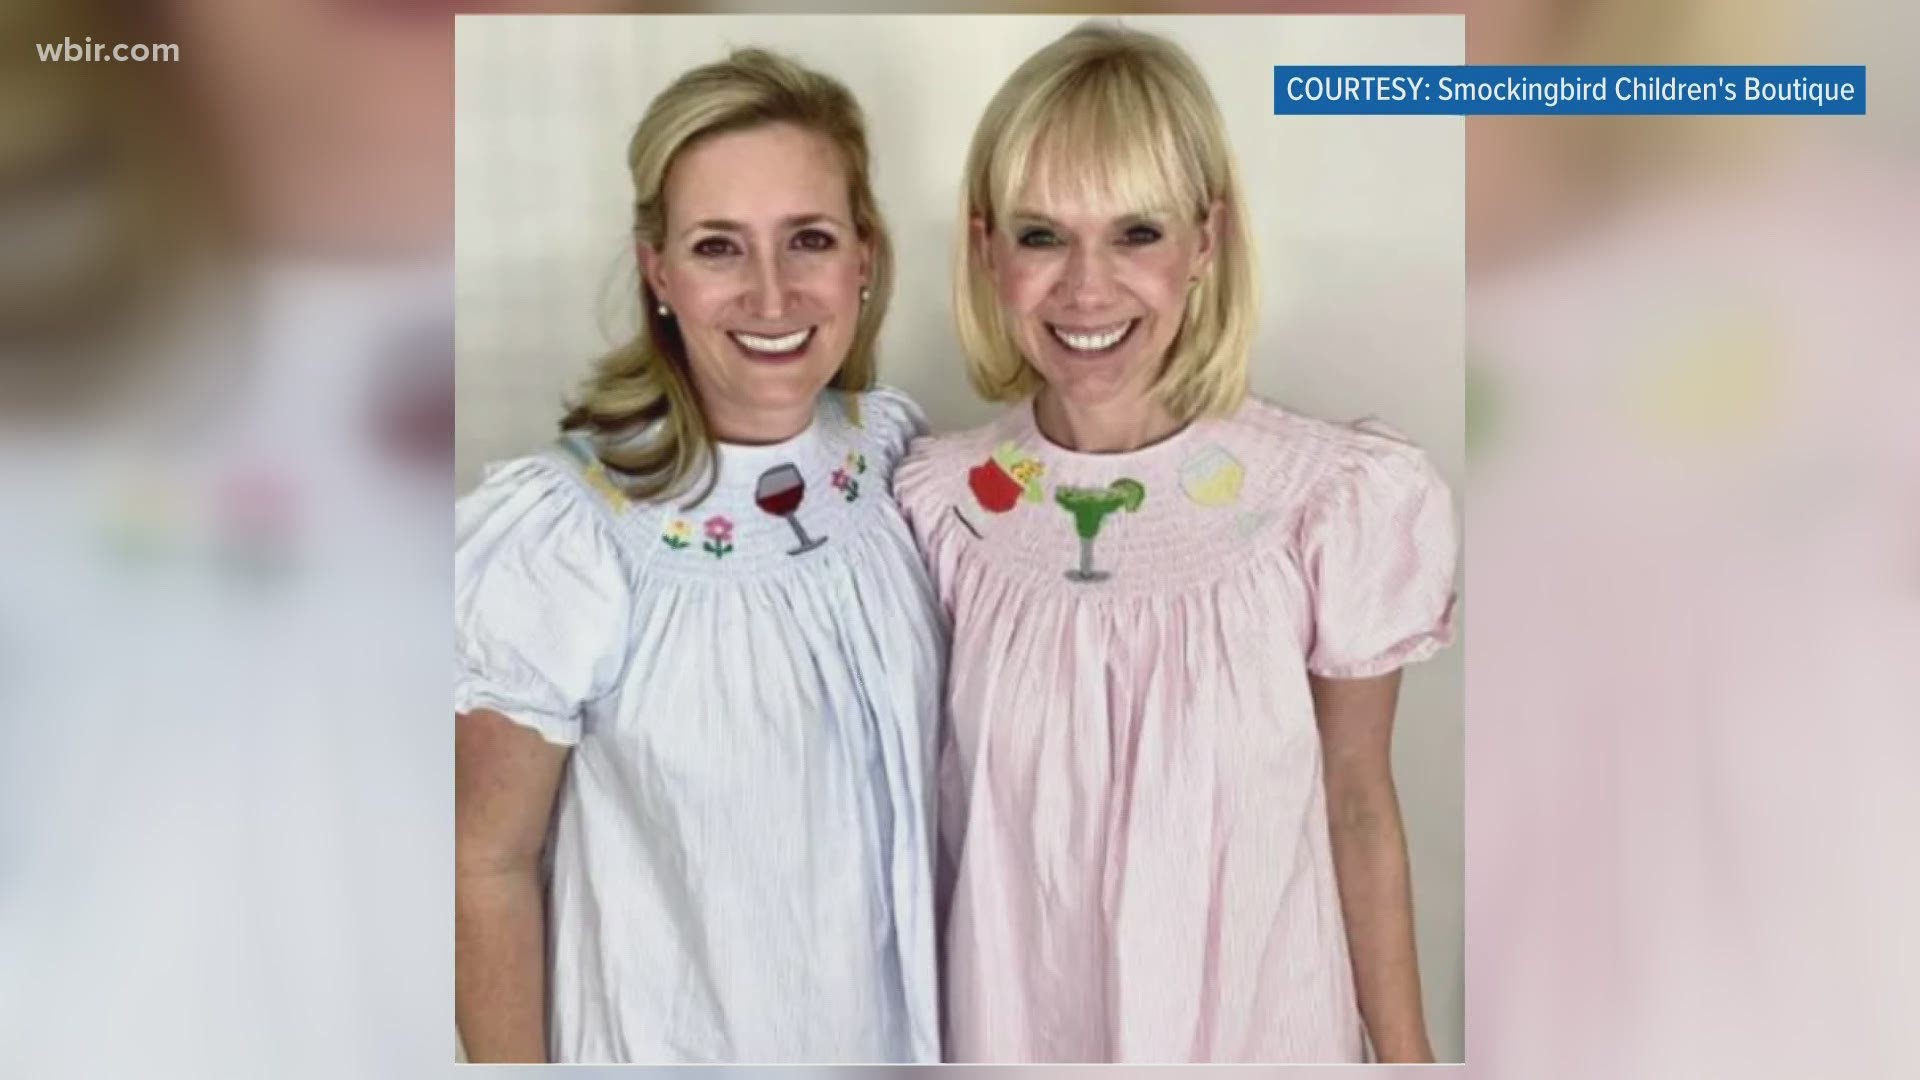 The owners of Smockingbird children's clothing created the "2020 smocked ladies dress" which features smocked white wine, a bloody mary and a margarita with peals.